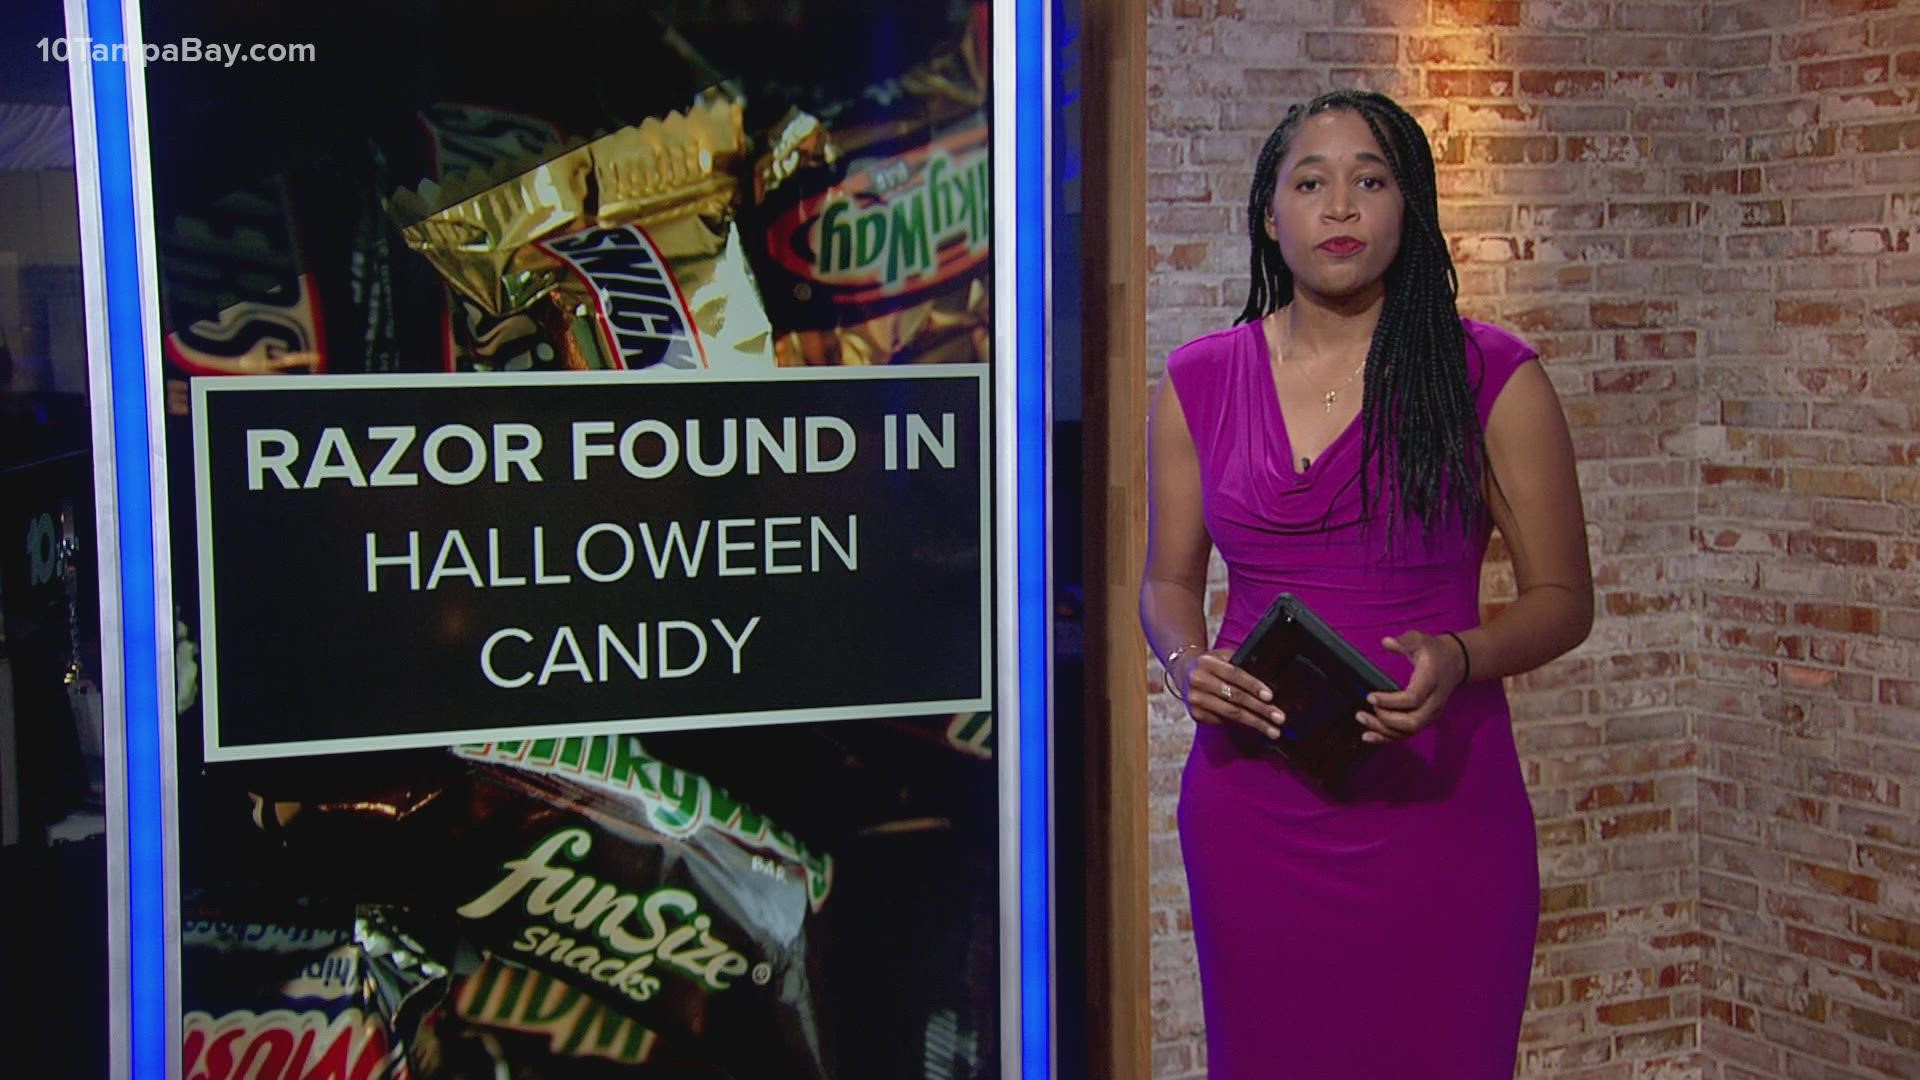 The little girl was eating a 100 Grand mini chocolate bar that she got trick-or-treating.